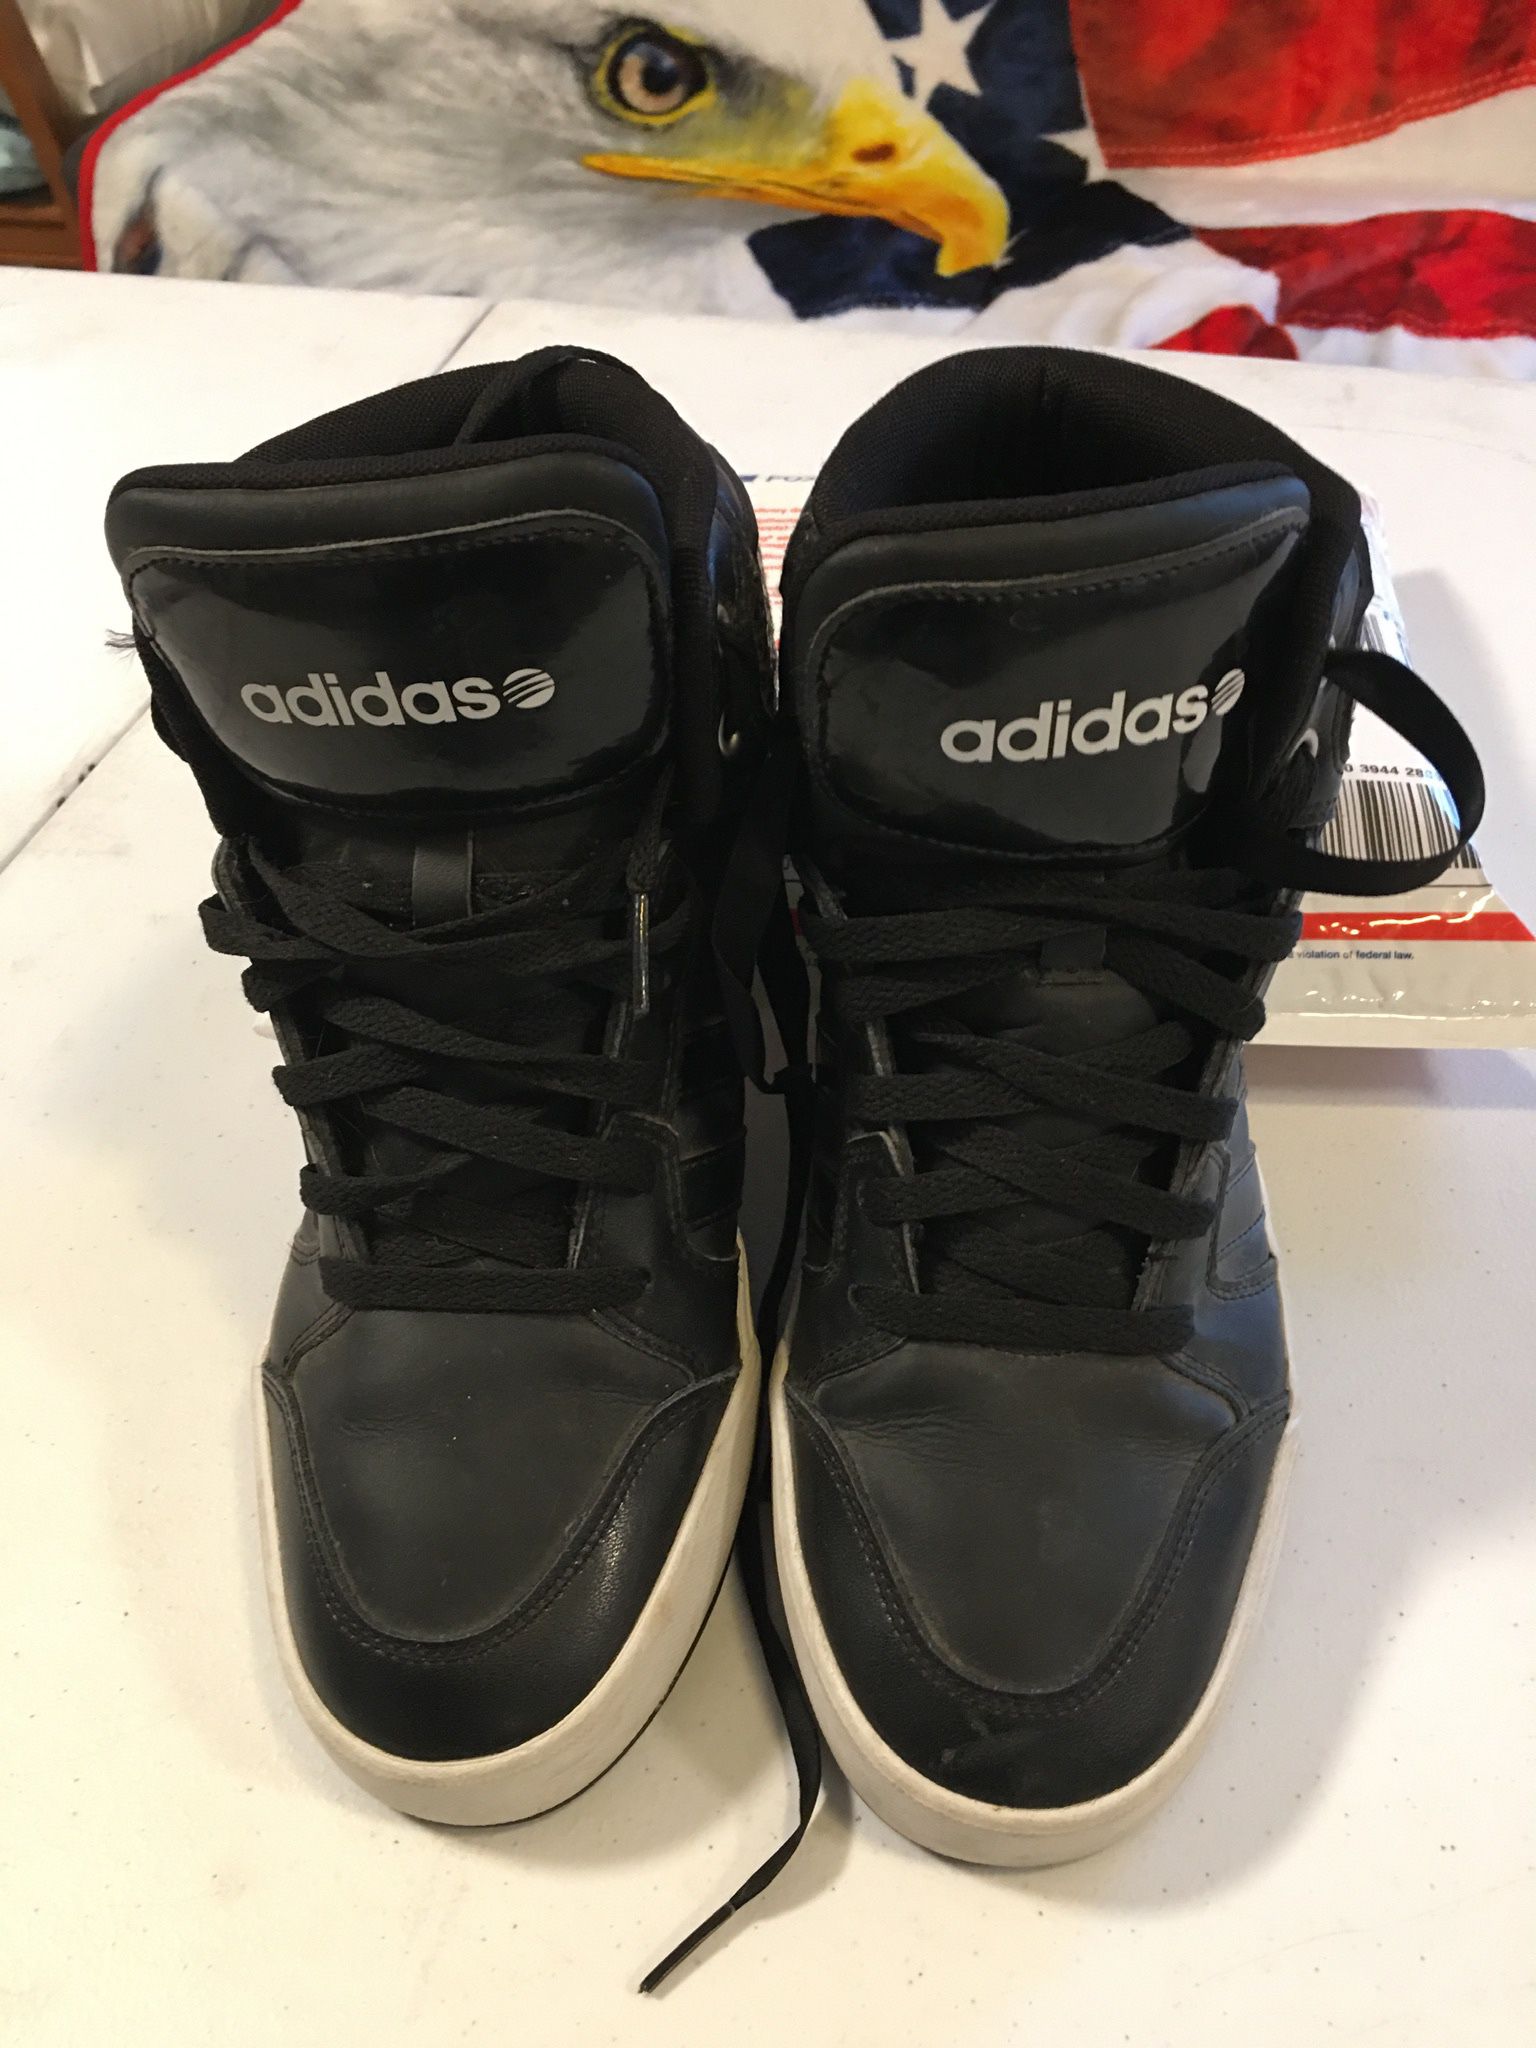 Adidas Ortholite NEO Black White High Tops Sneakers 9.5 Shoes for Sale in Cincinnati, OH - OfferUp